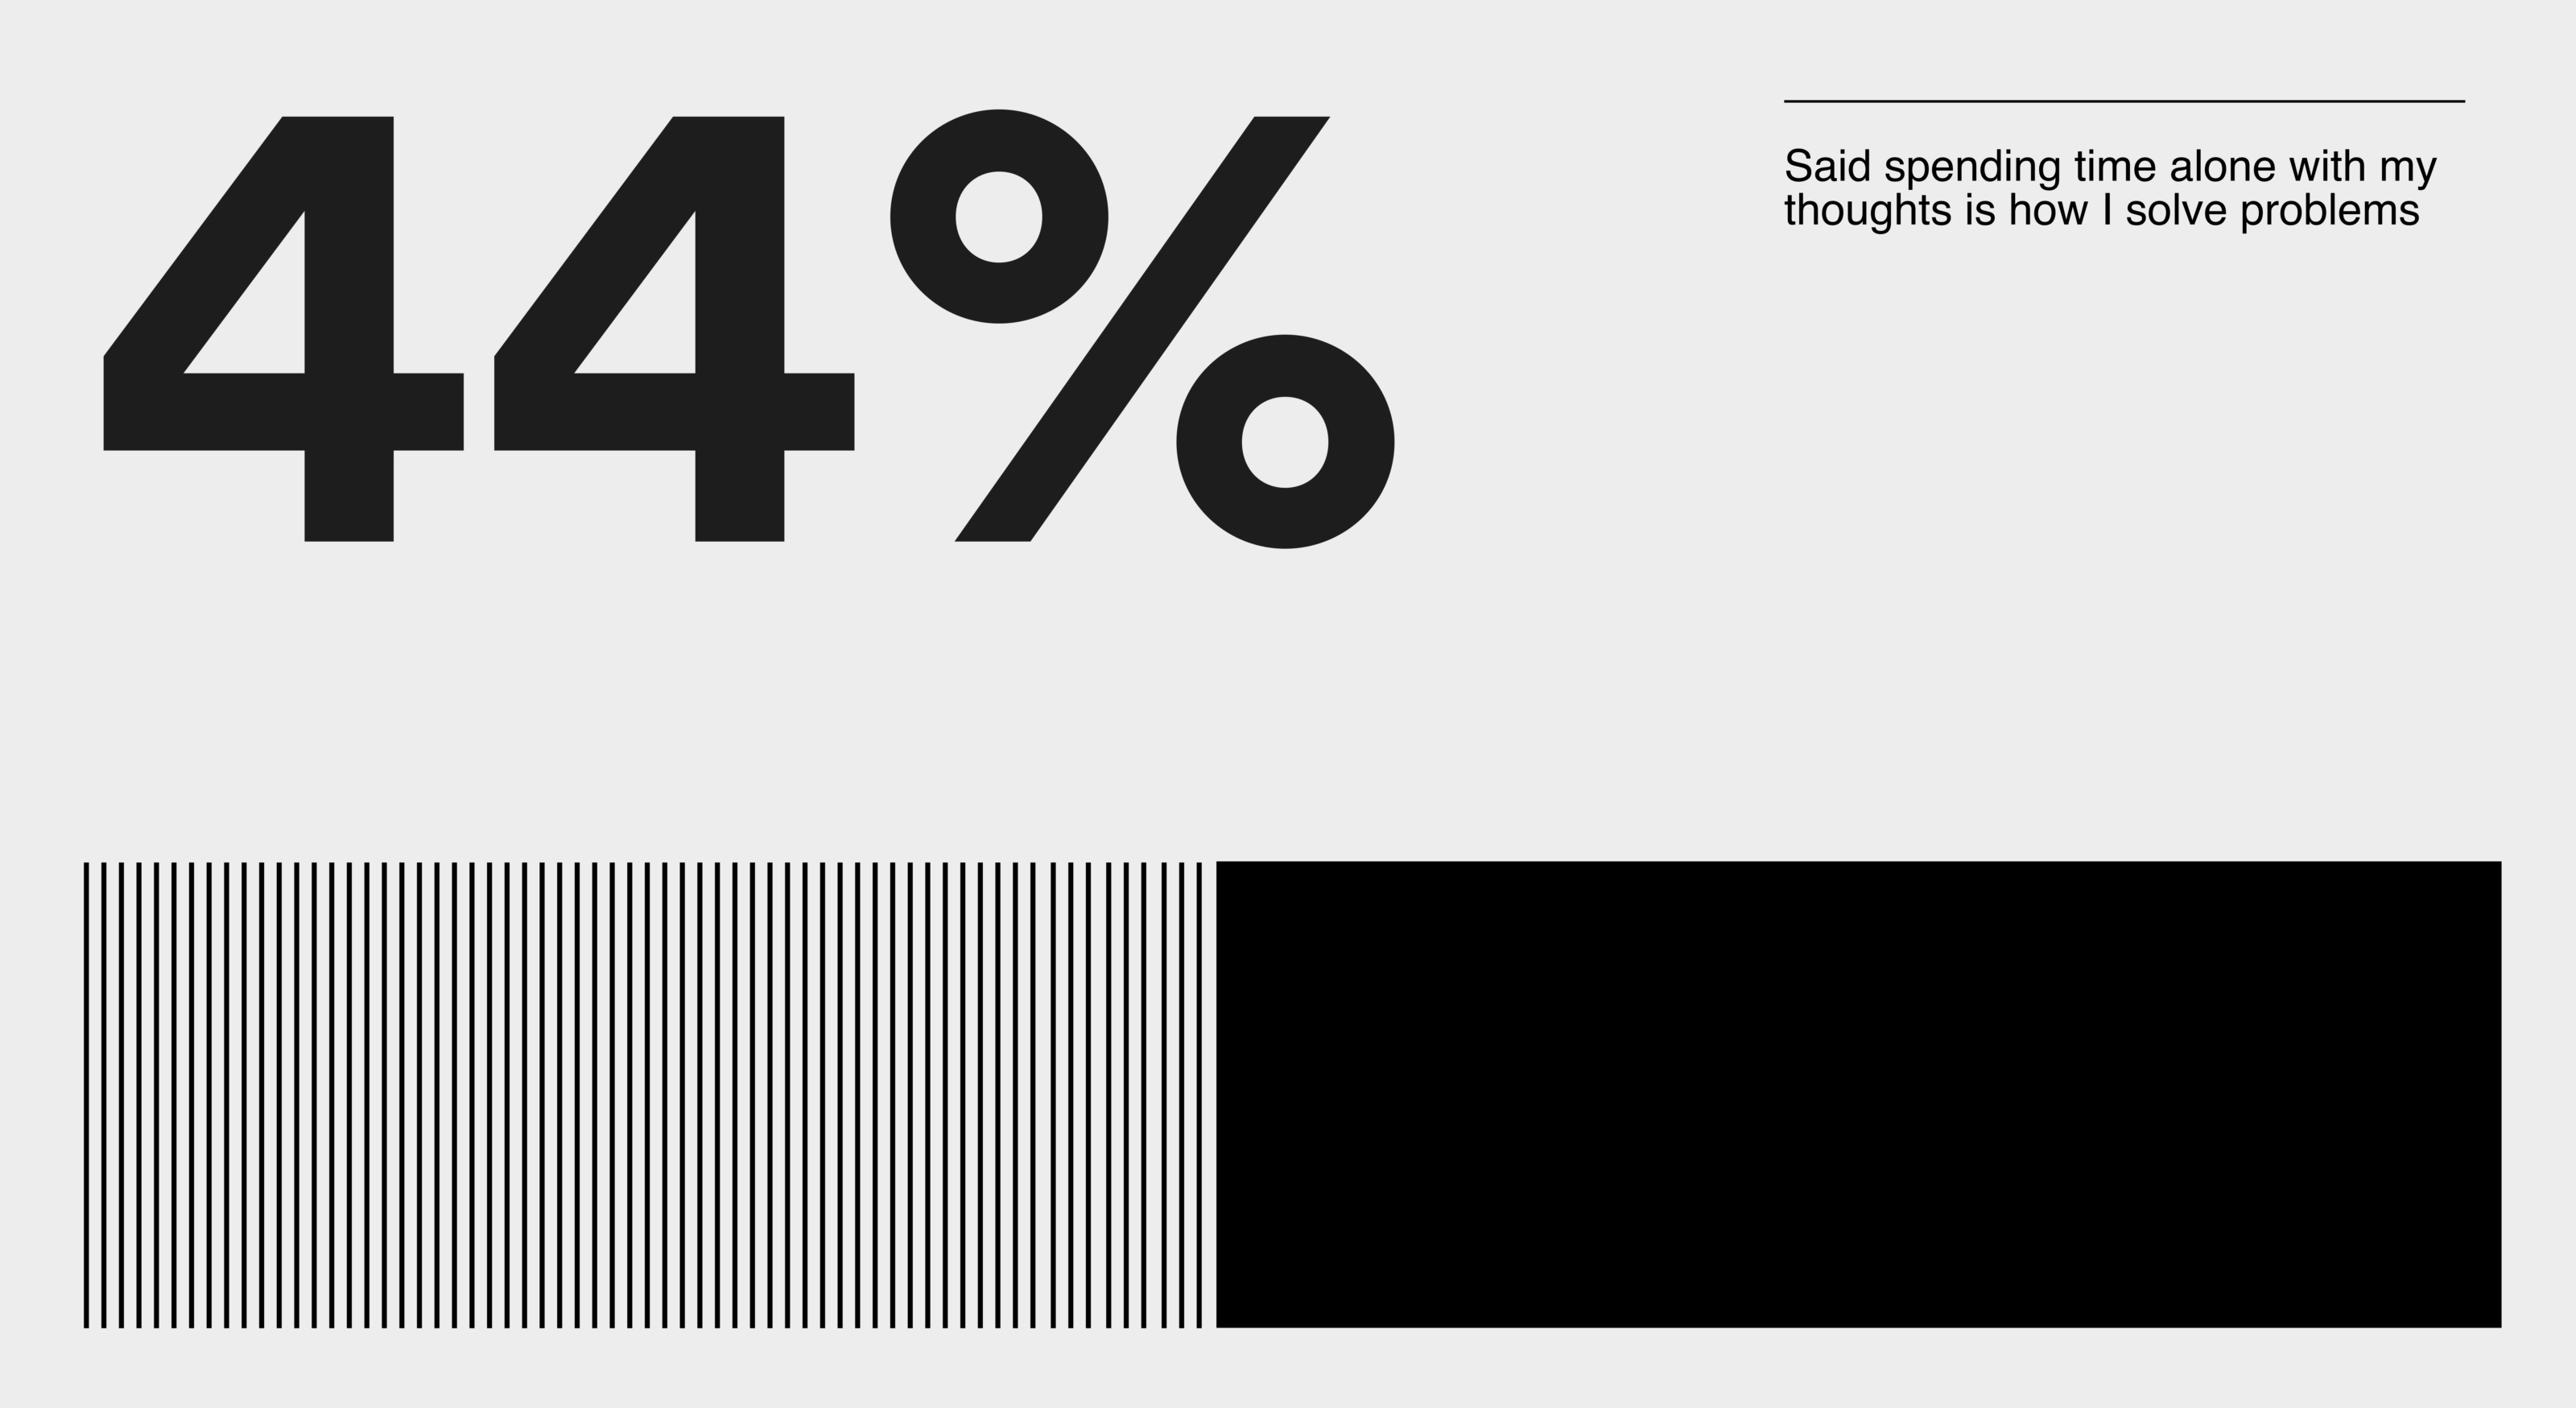 Infographic: “44% said spending time alone with my thoughts is how I solve my problems”